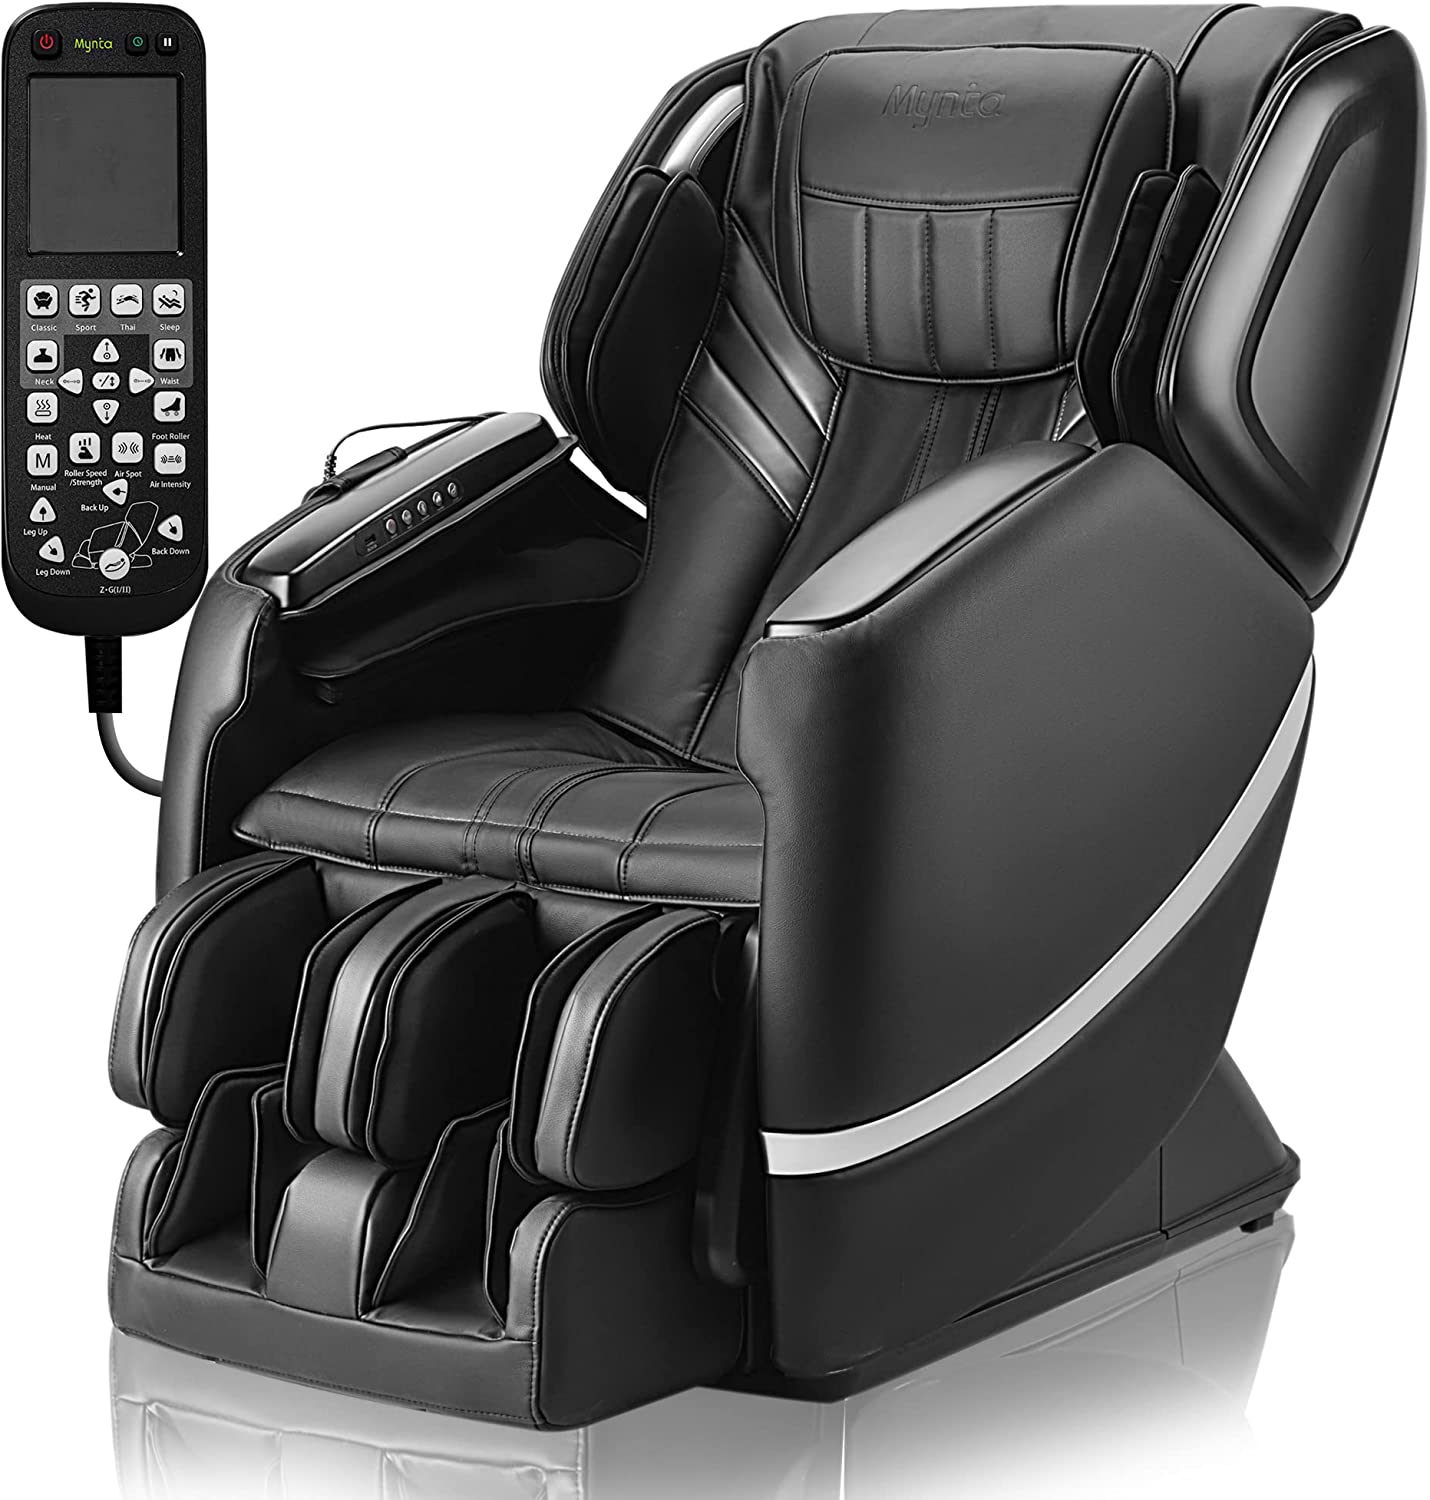 Mynta Mc1710 Massage Chair Review Discover The Ultimate Relaxation And Comfort With This State